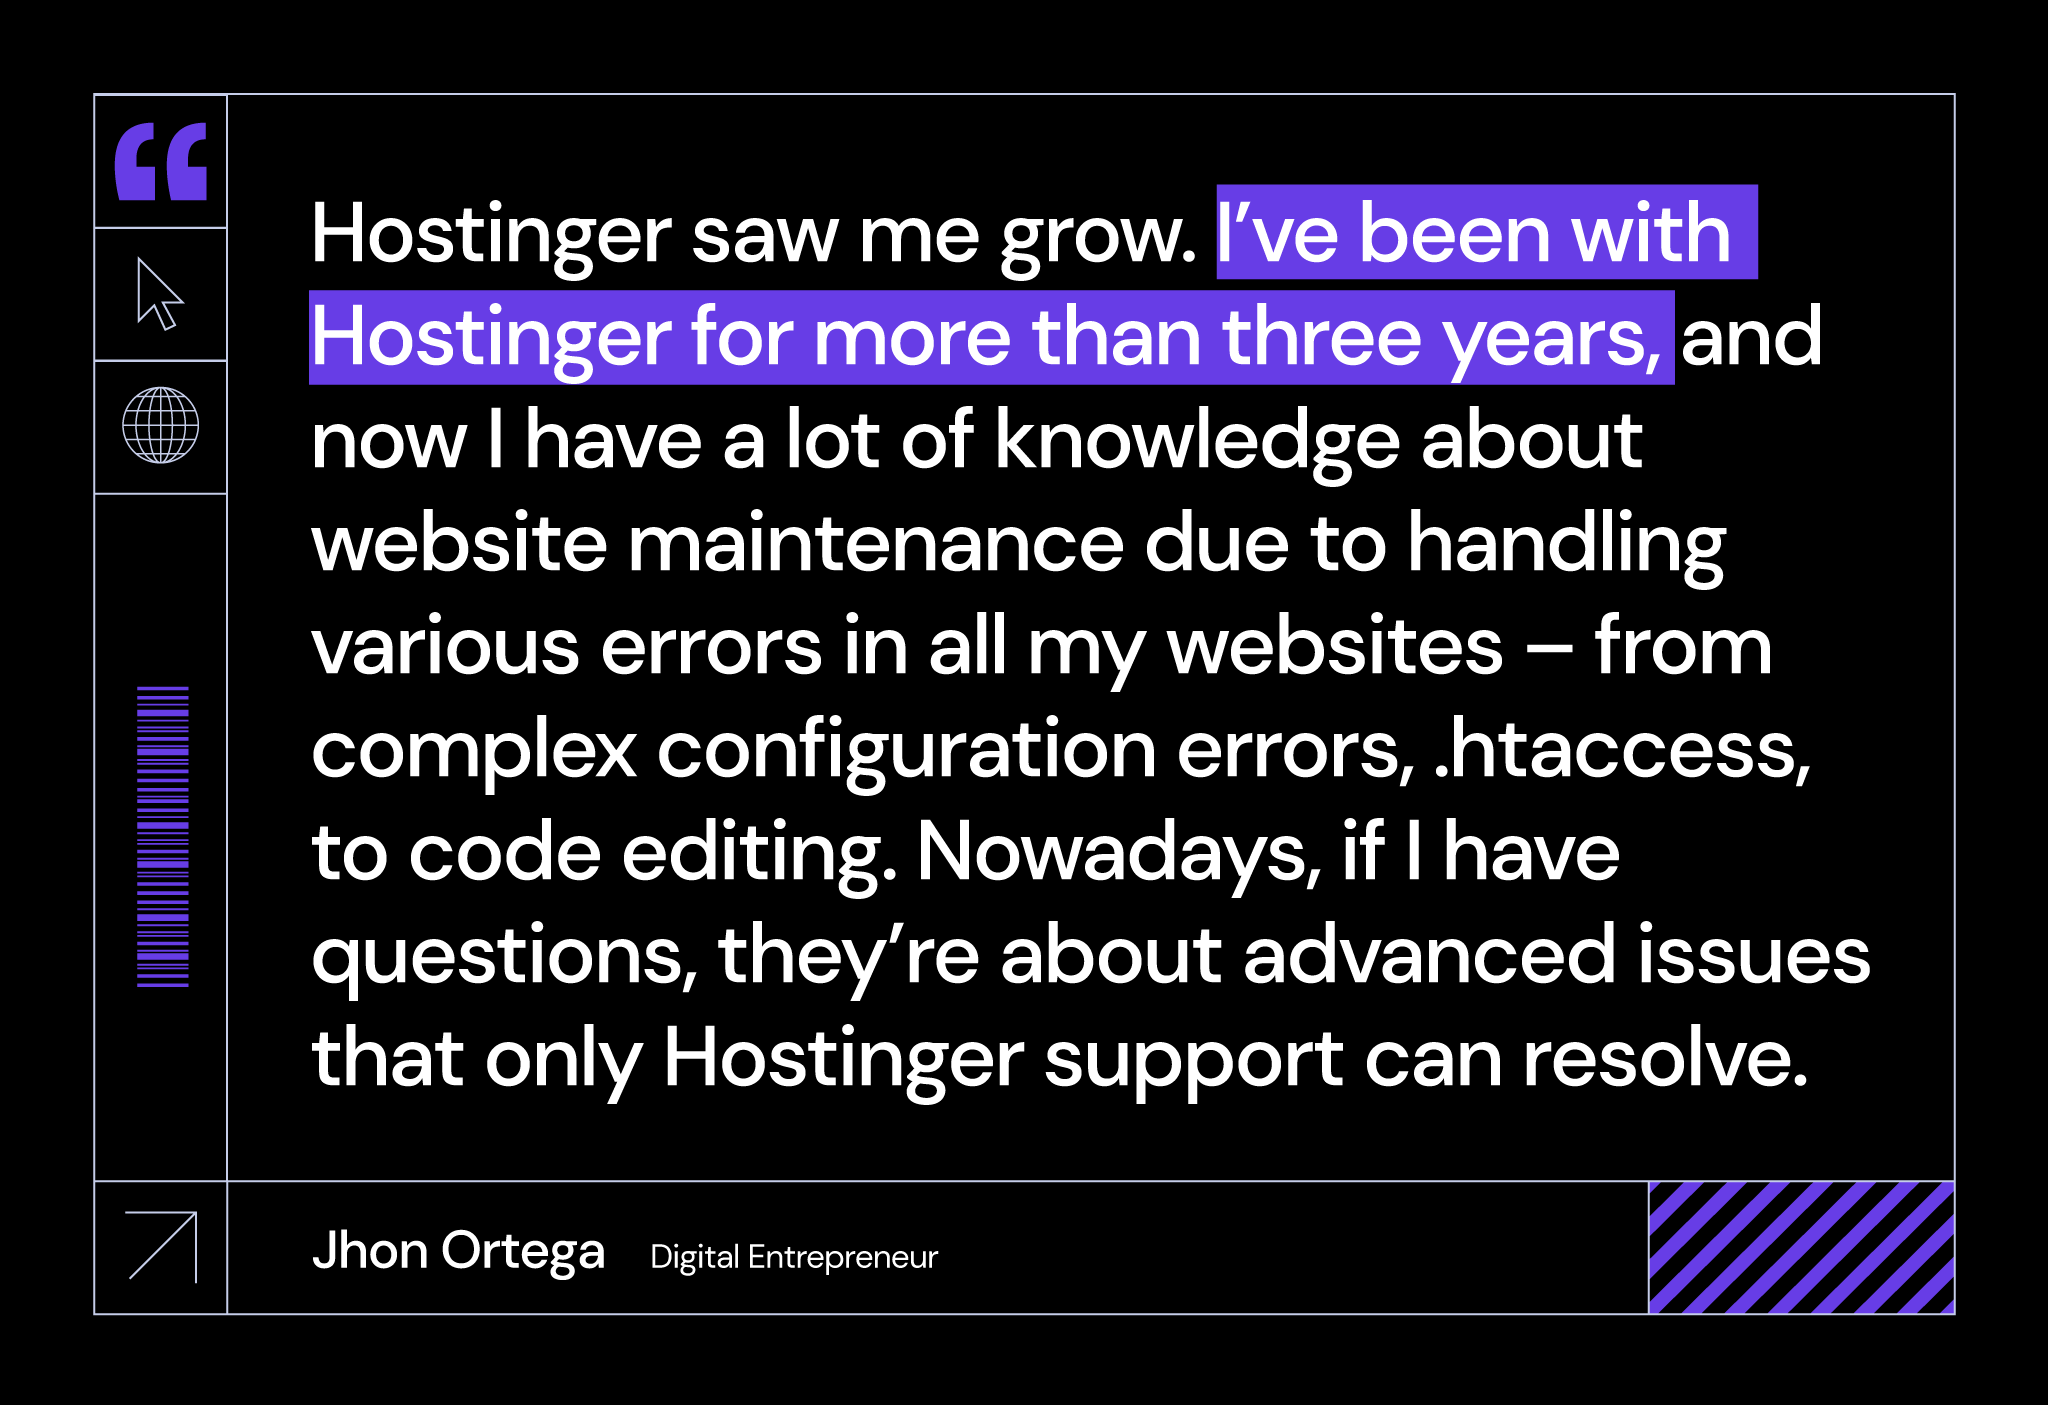 Quote by Jhon on how Hostinger has helped them grow their website building and maintenance skills